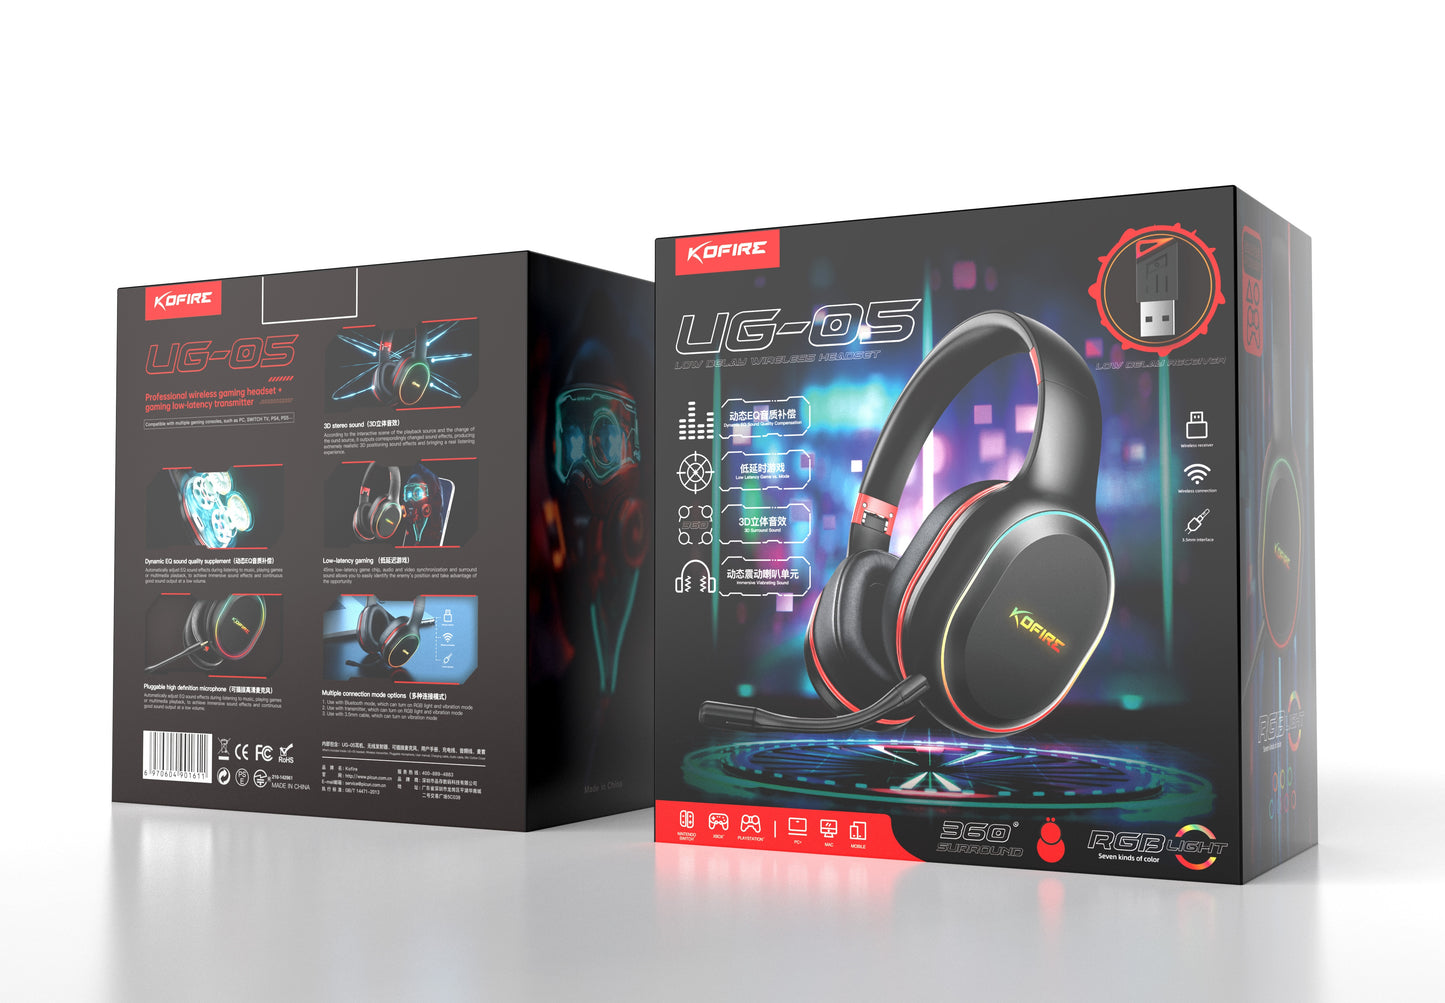 Picun Wireless Gaming Headset